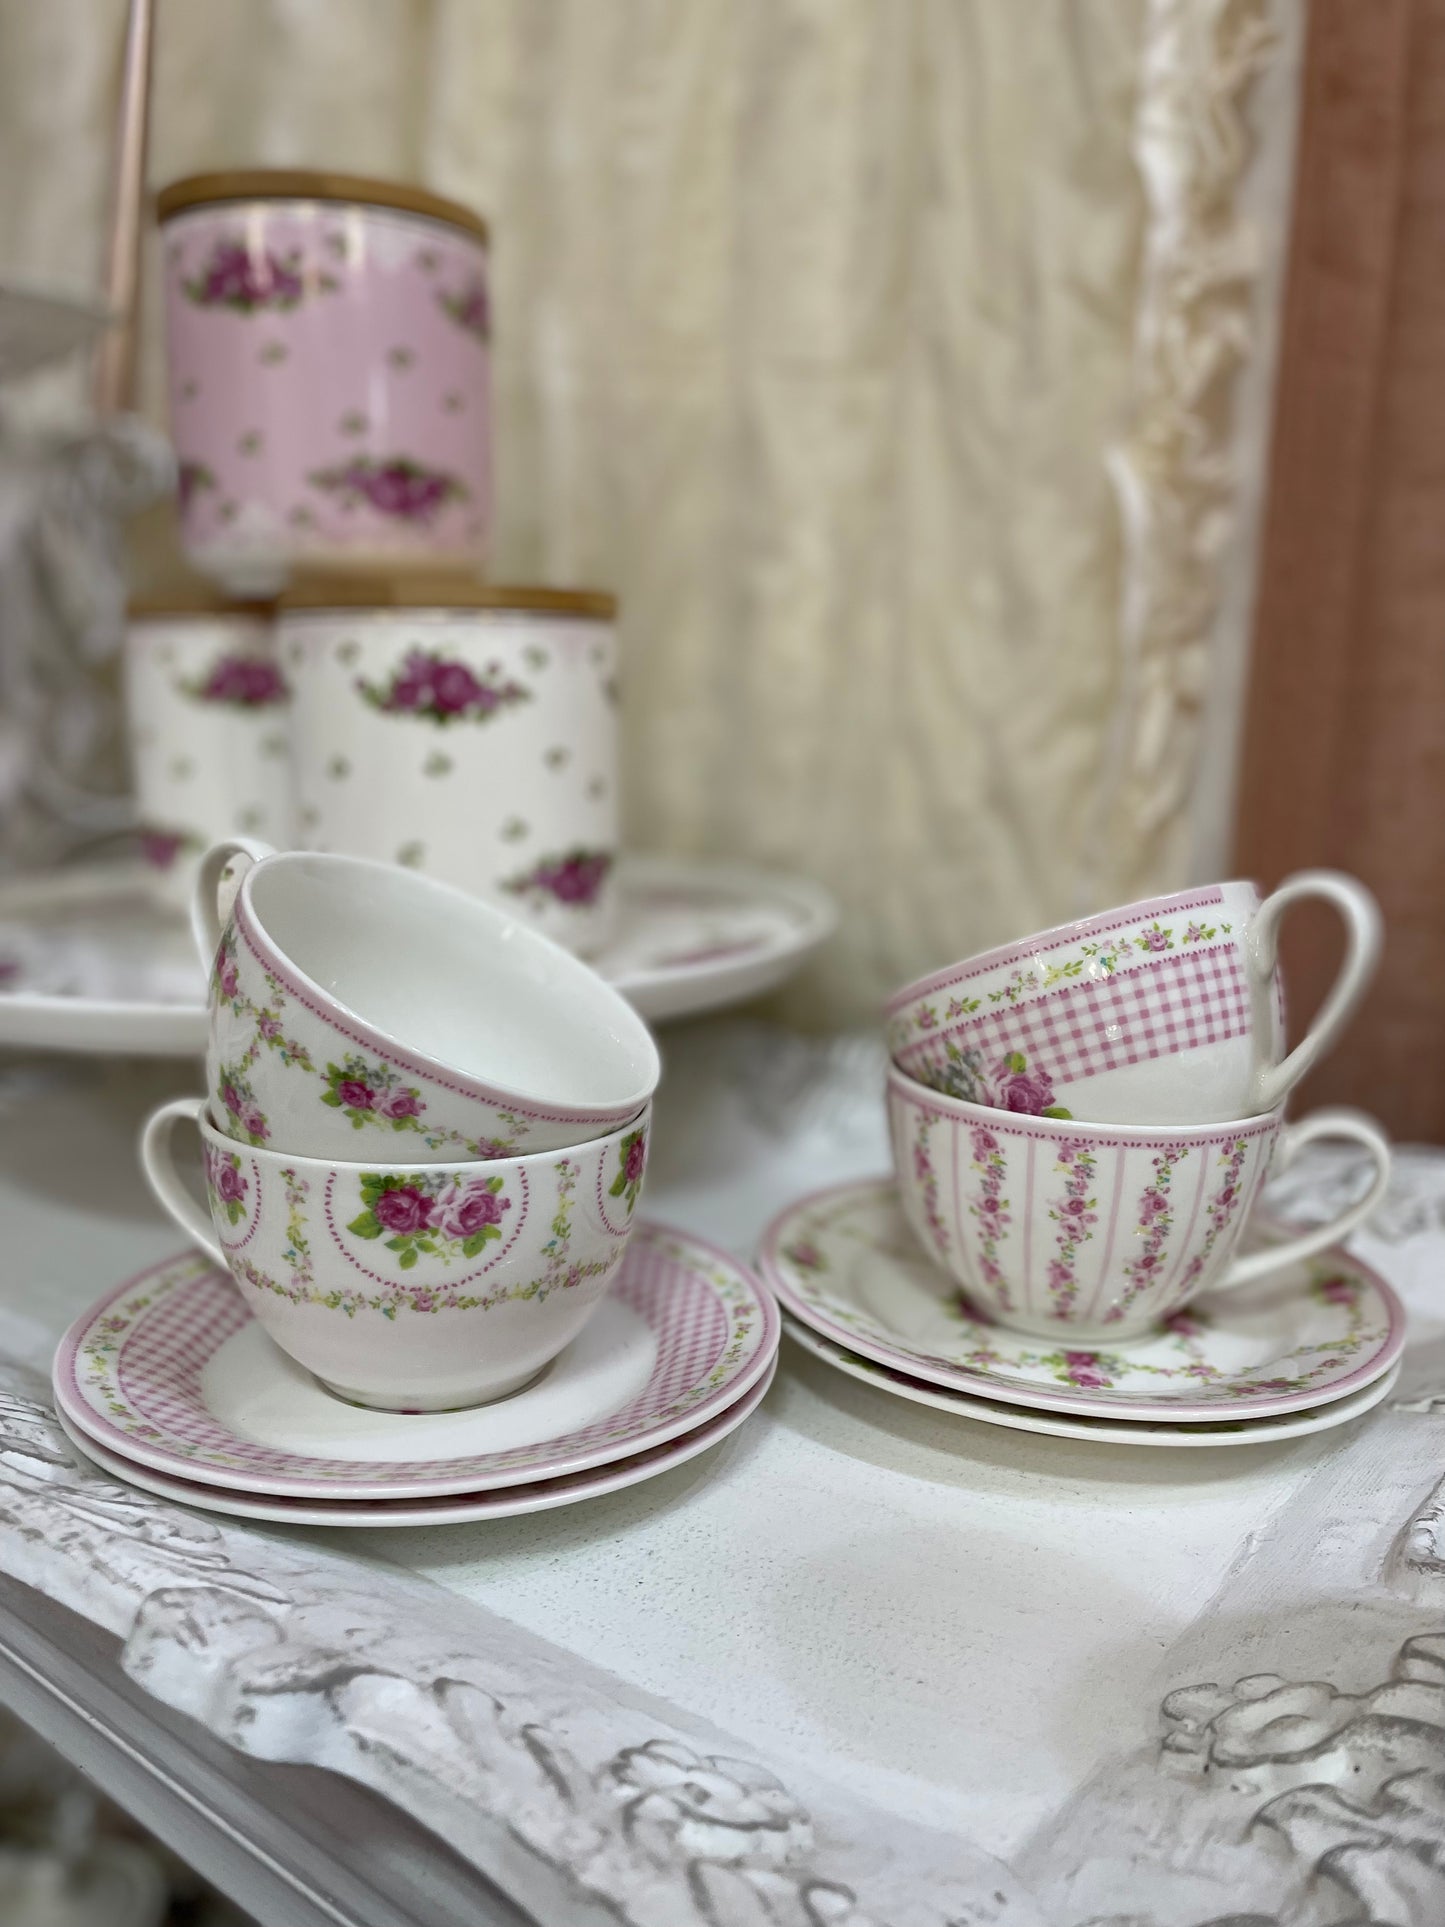 Set of 4 cups with saucer "Rose del borgo" Blanc Mariclò